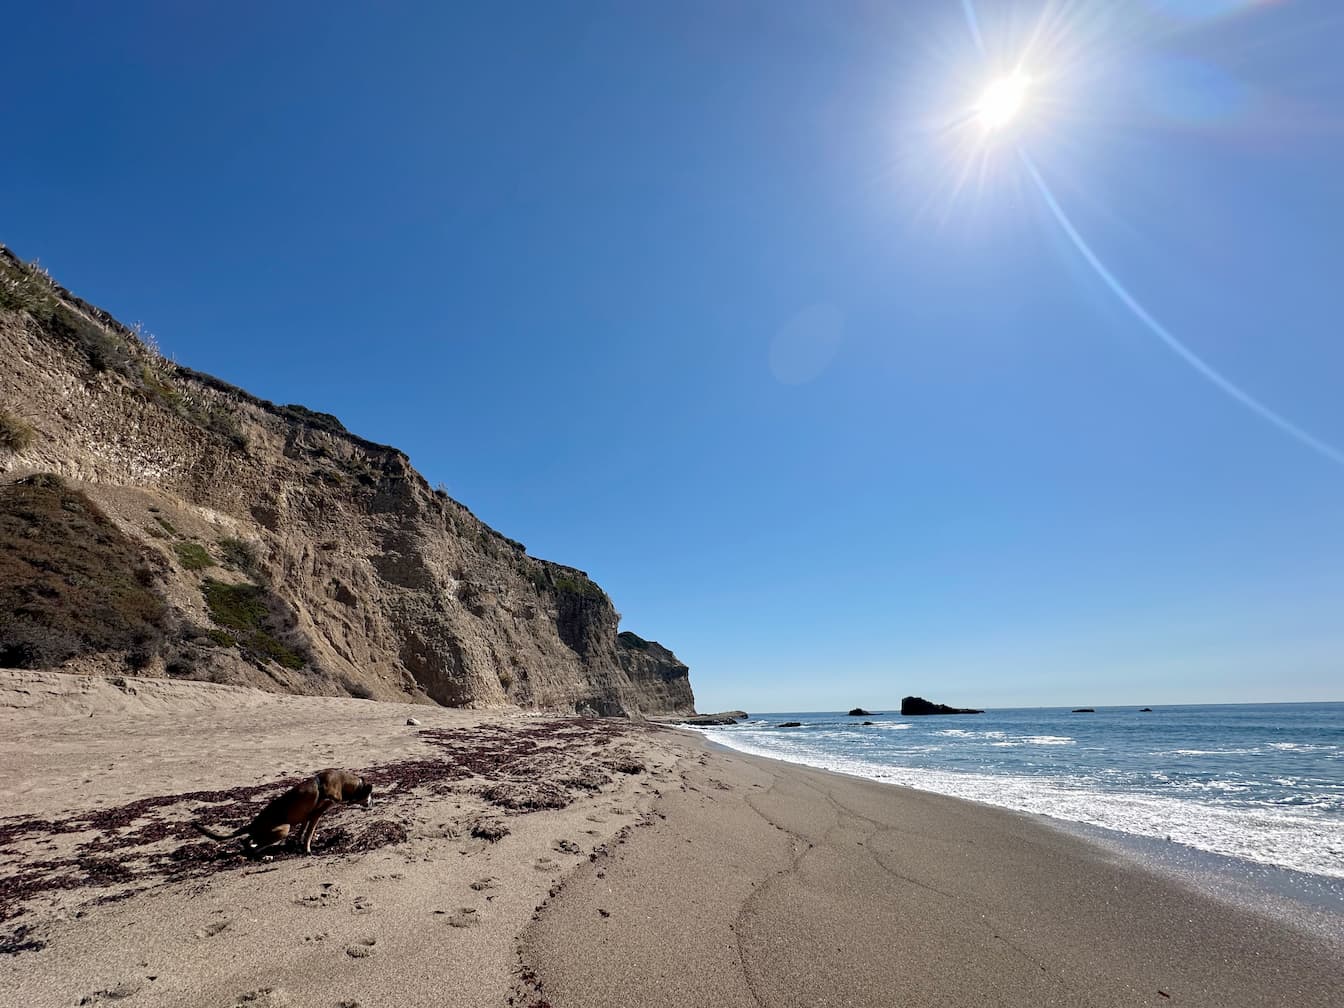 A bright blue sky over a beach, with sandy cliffs and the Pacific ocean in the frame